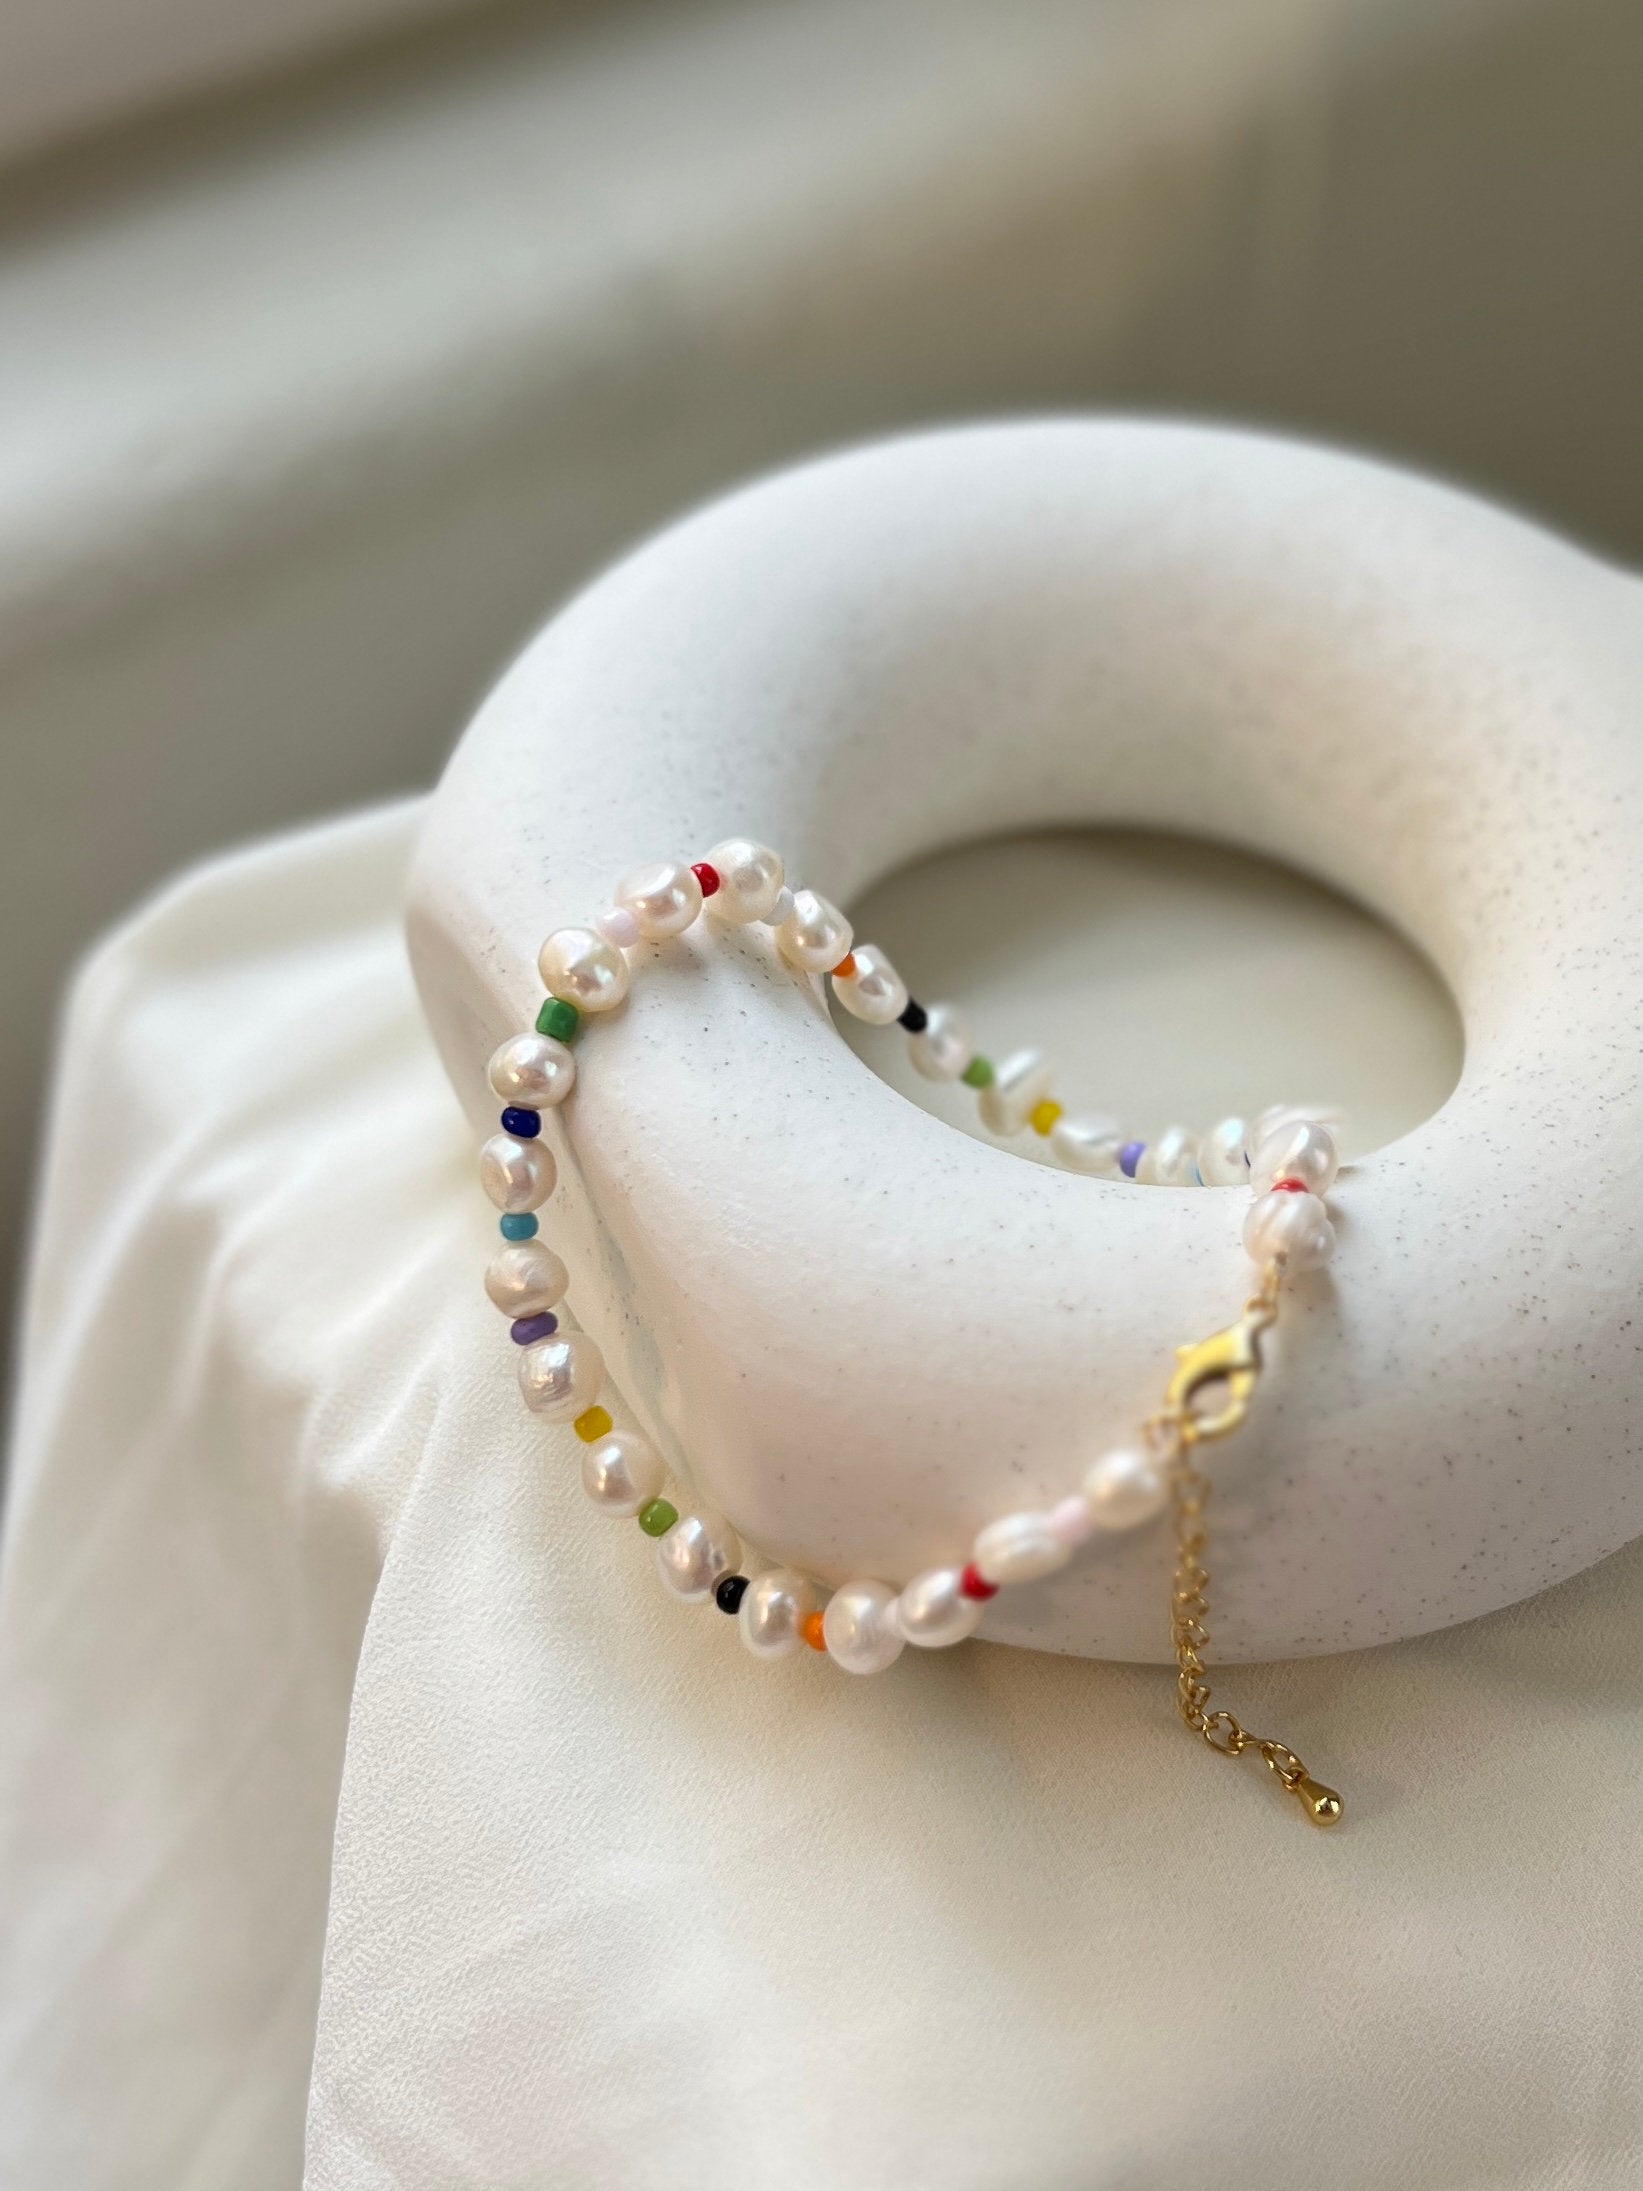 Baroque Pearl Anklet, Colorful Beads Anklet, Natural Pearl Anklet